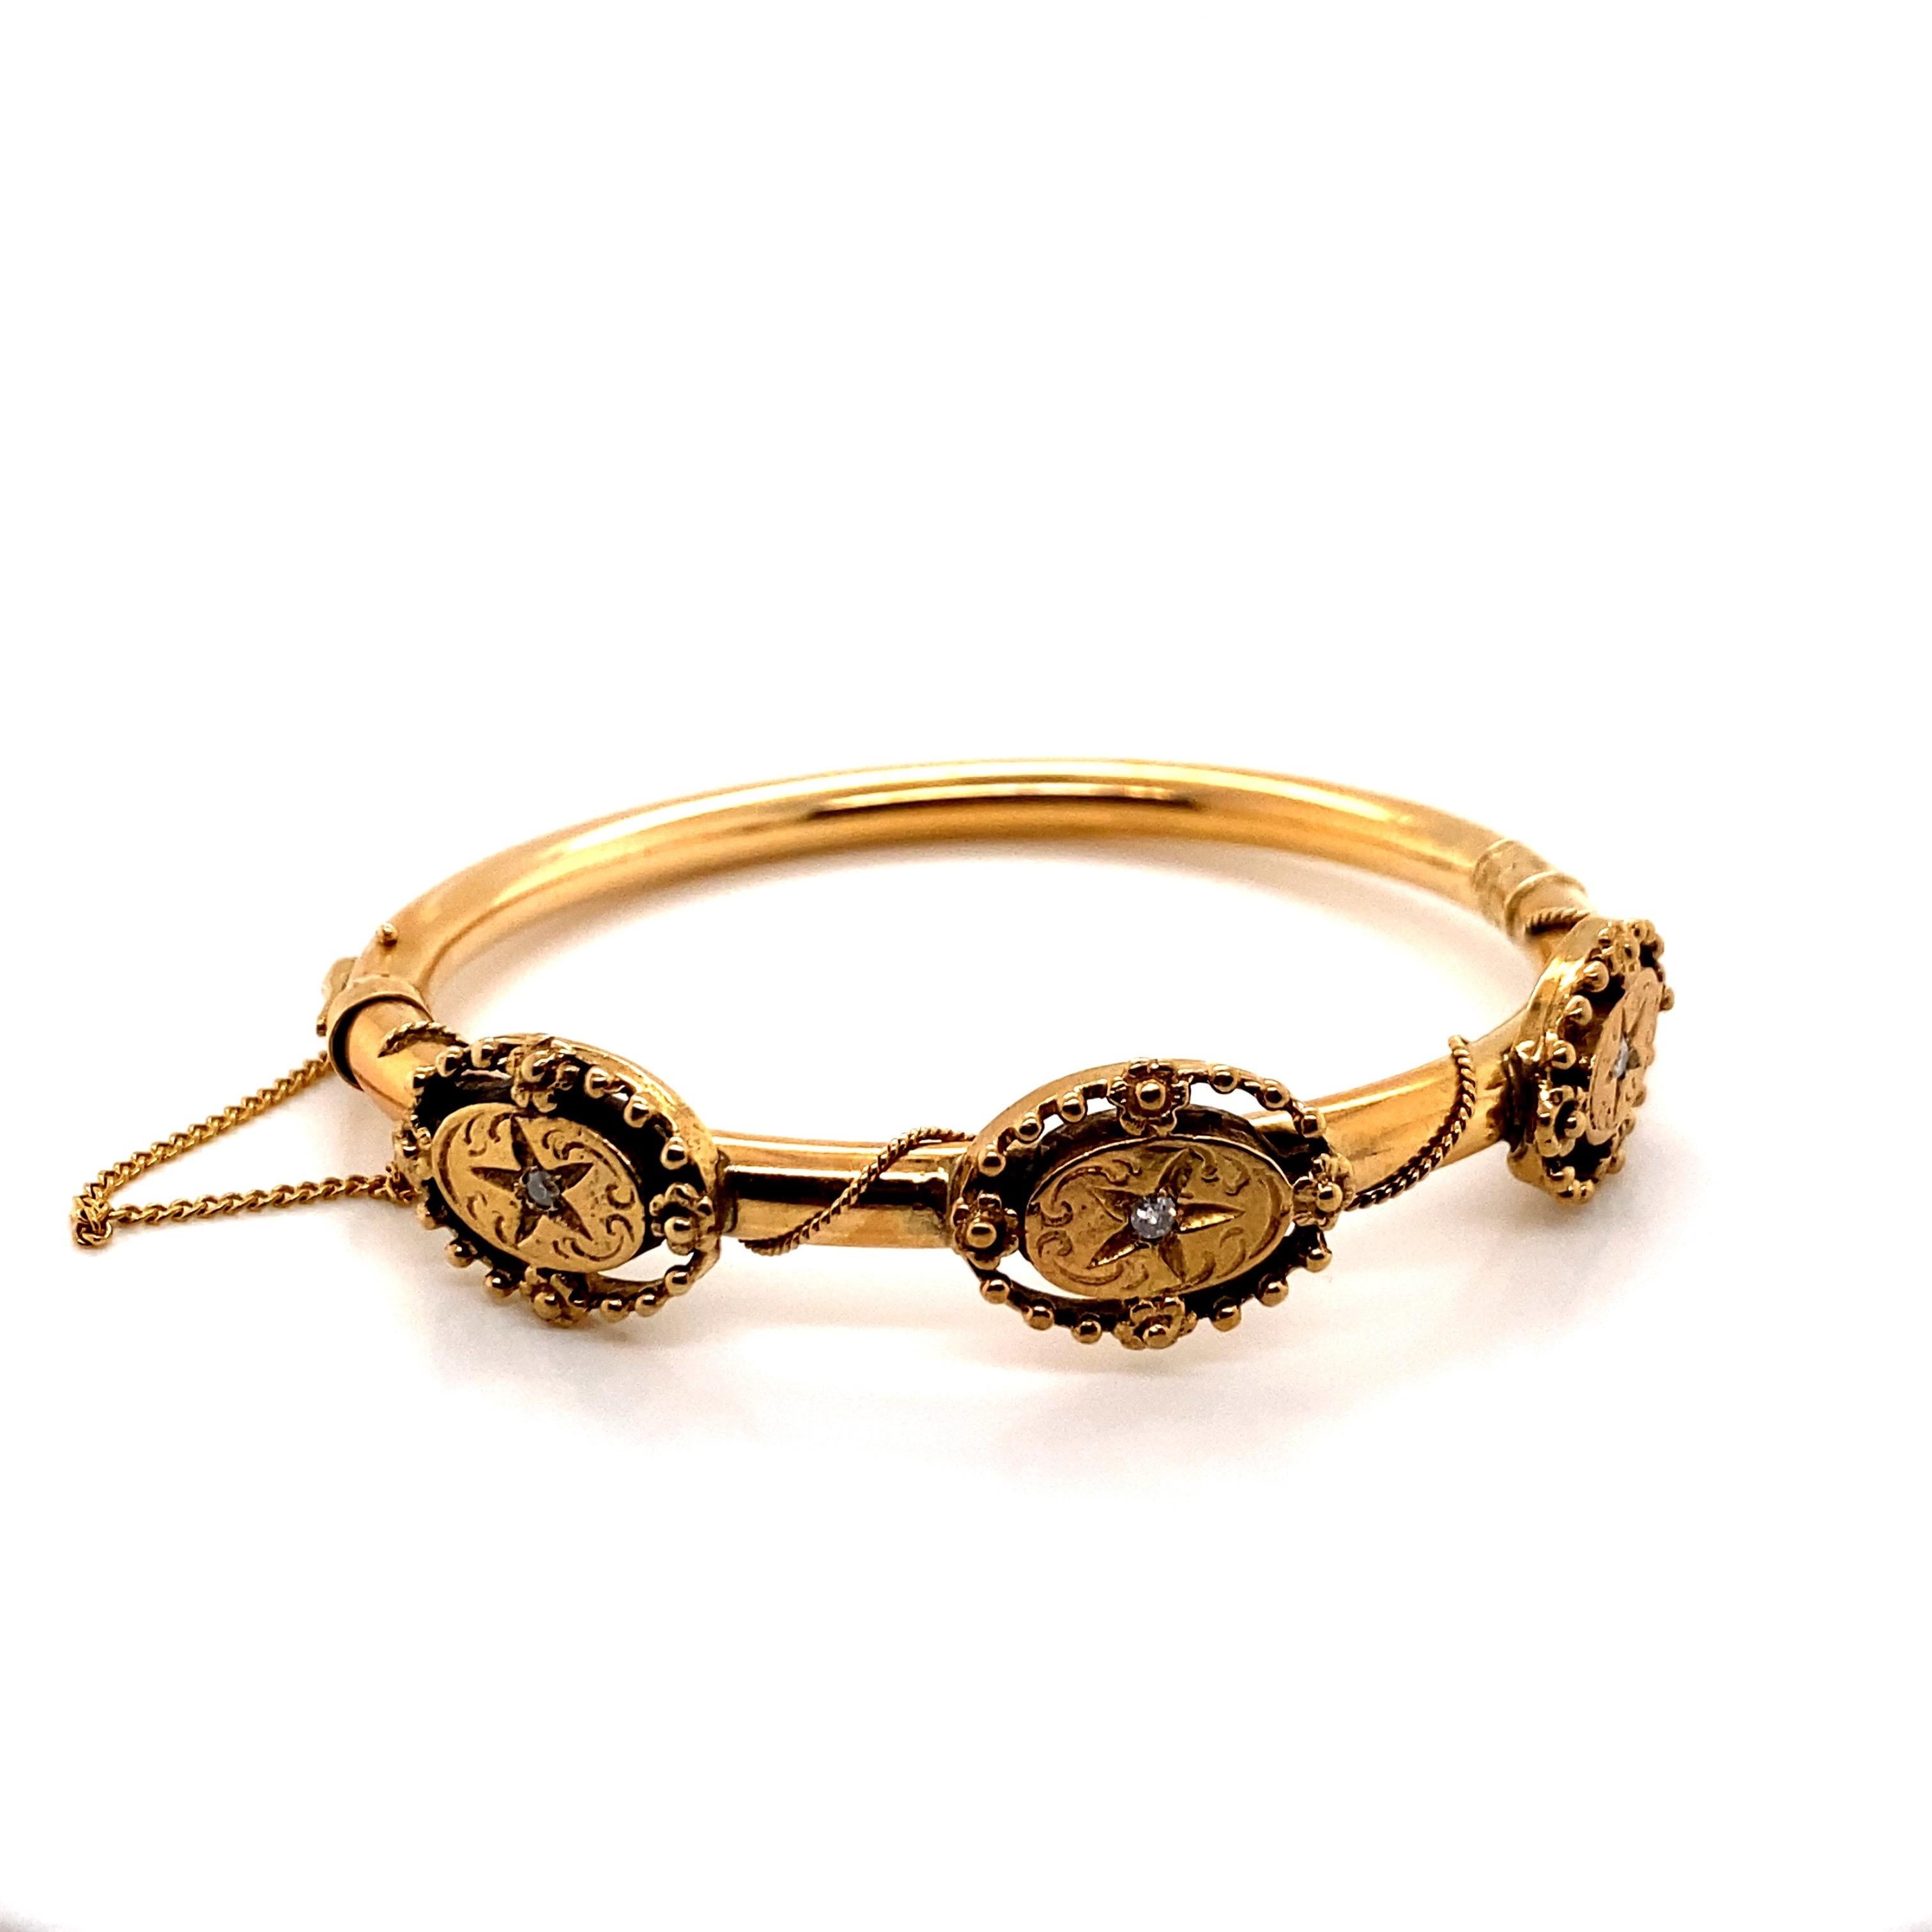 Vintage 14K Yellow Gold Bangle Bracelet In Good Condition For Sale In Boston, MA